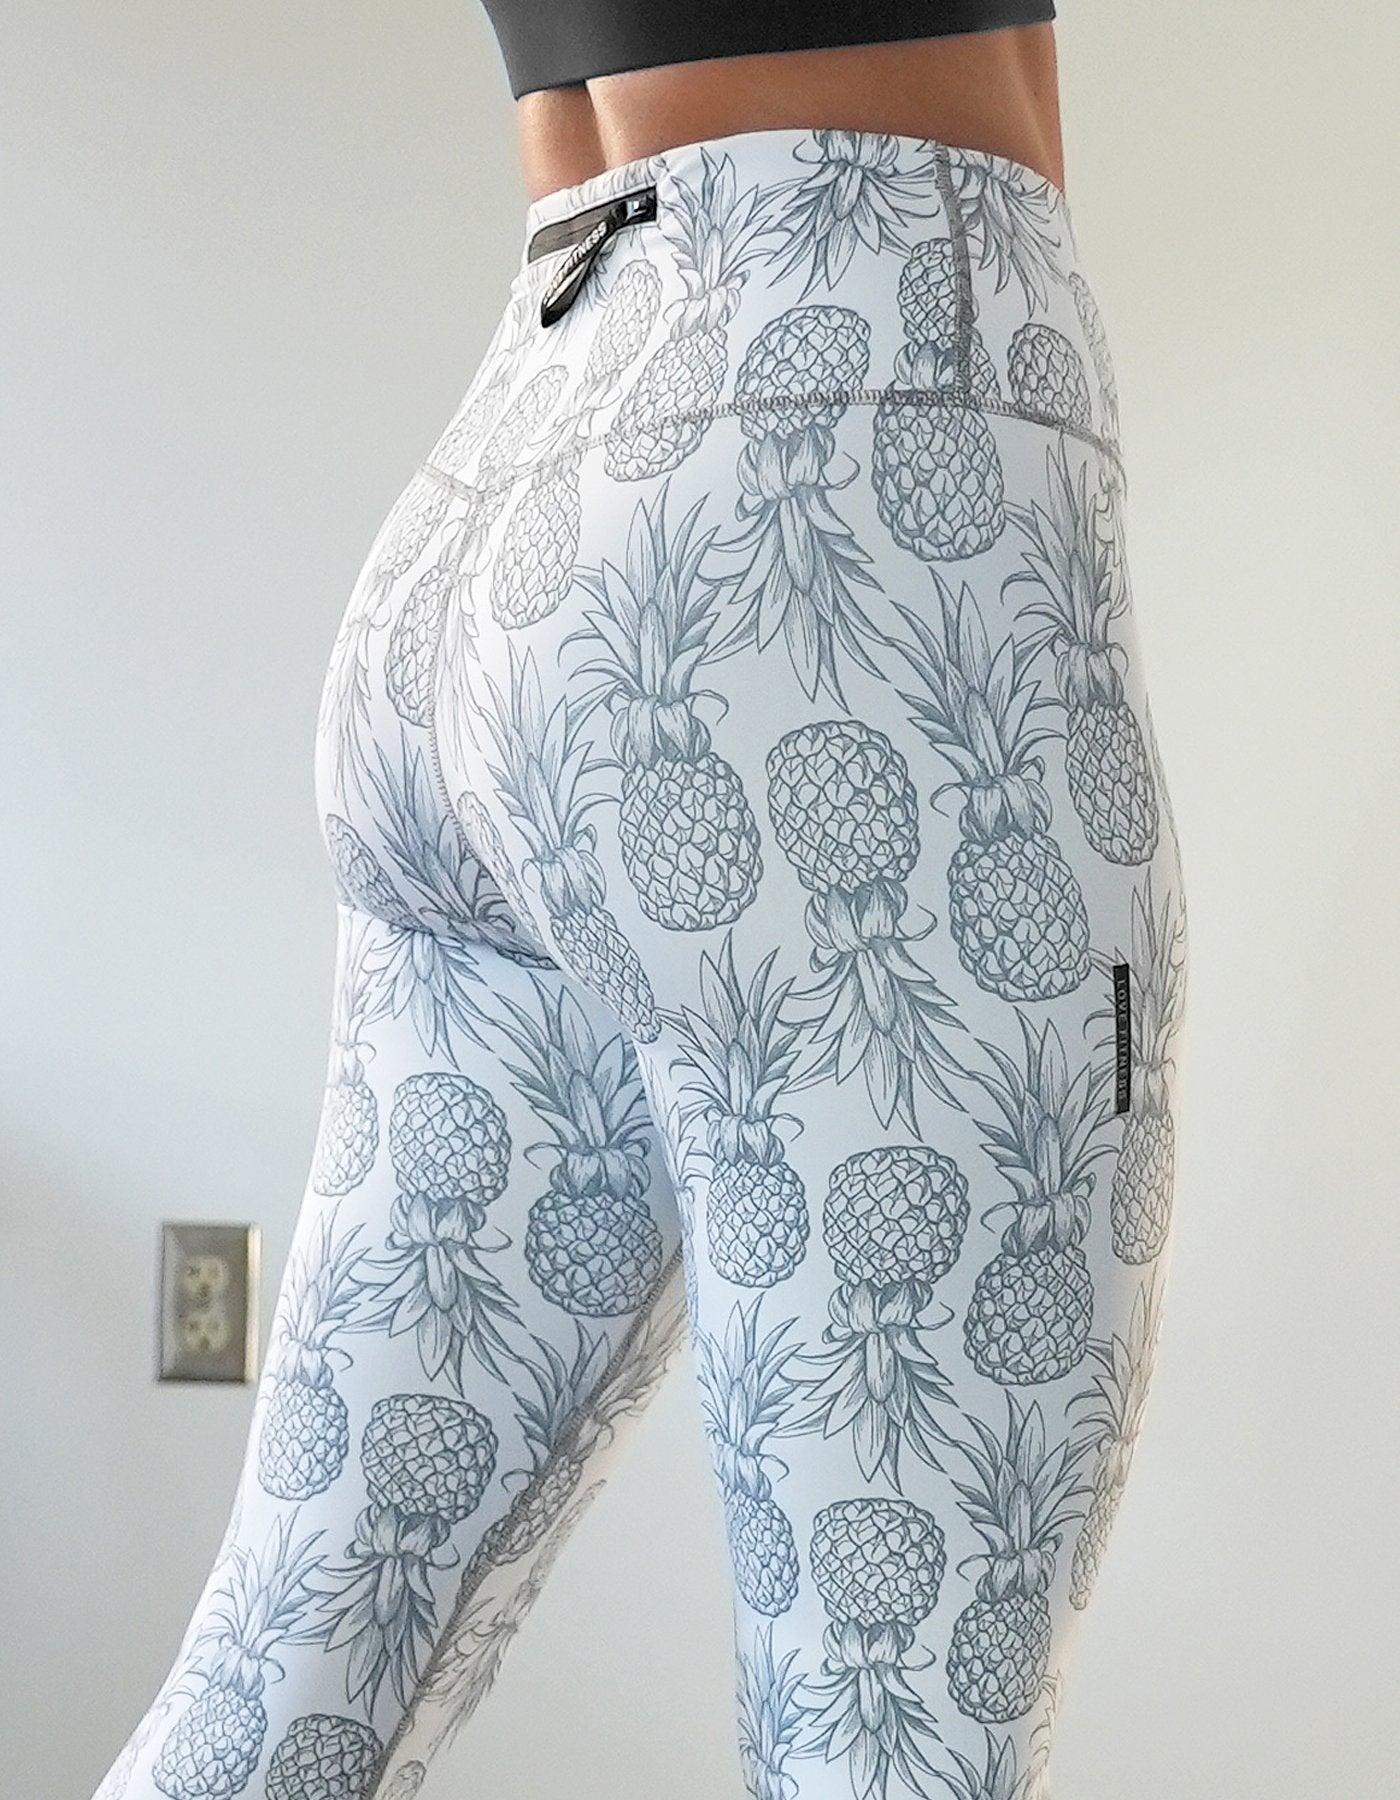 Workout Leggings  Eco-Friendly - The Green Pineapple